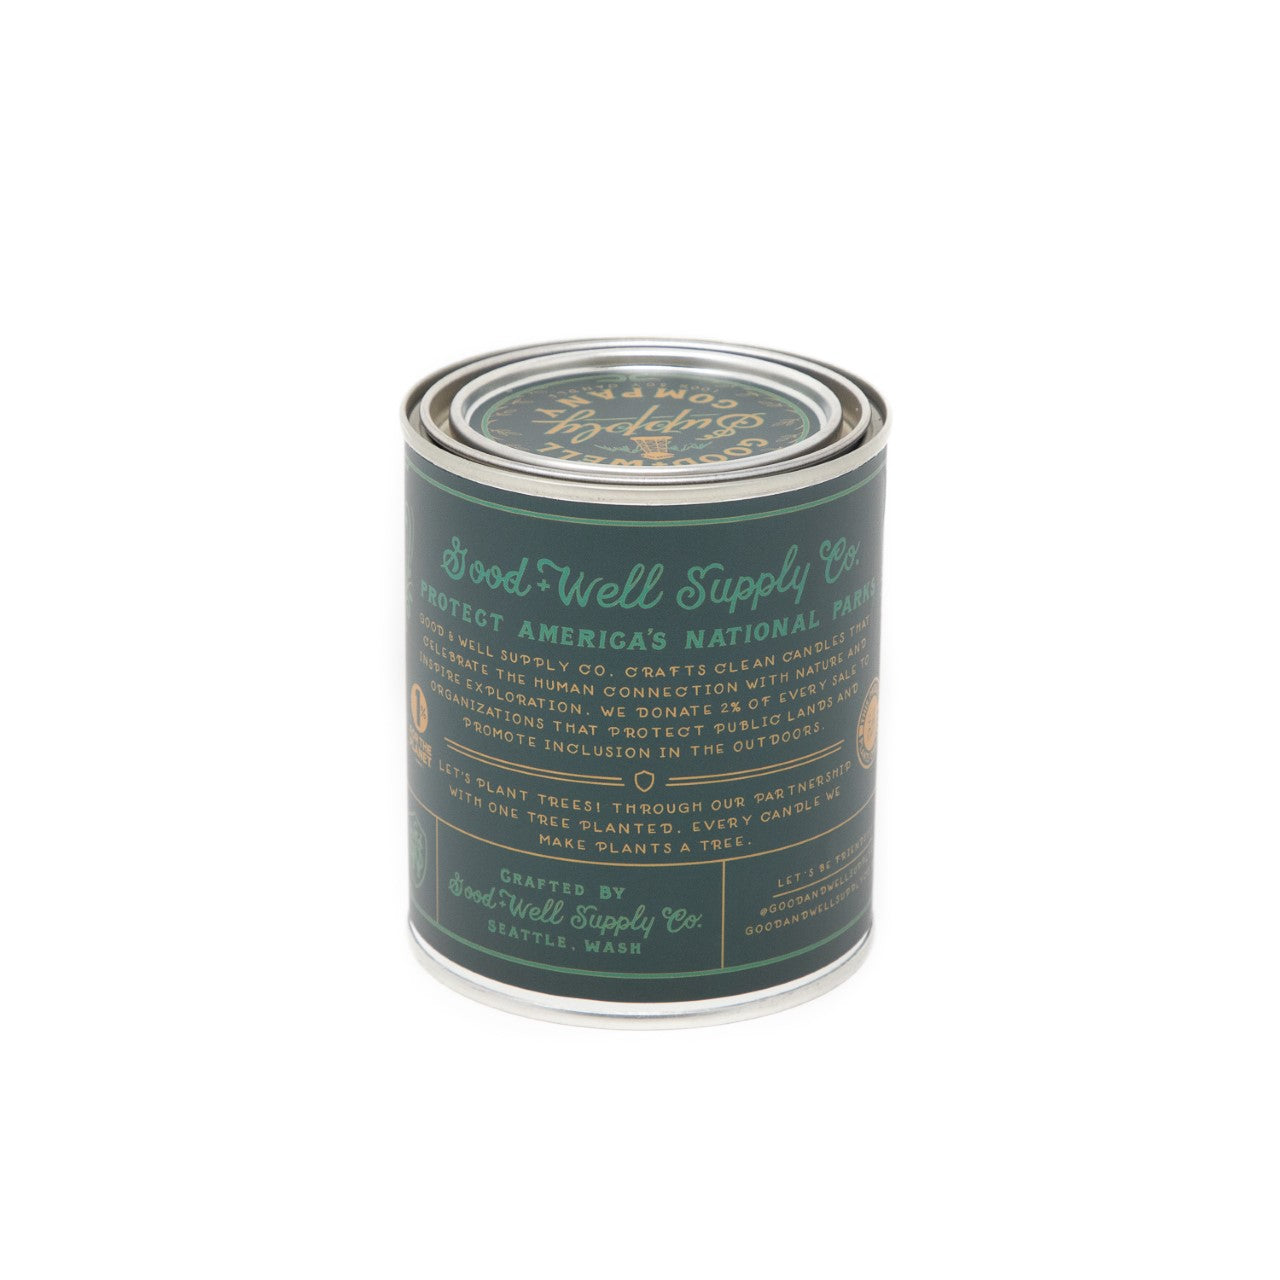 North Cascades National Park Candle